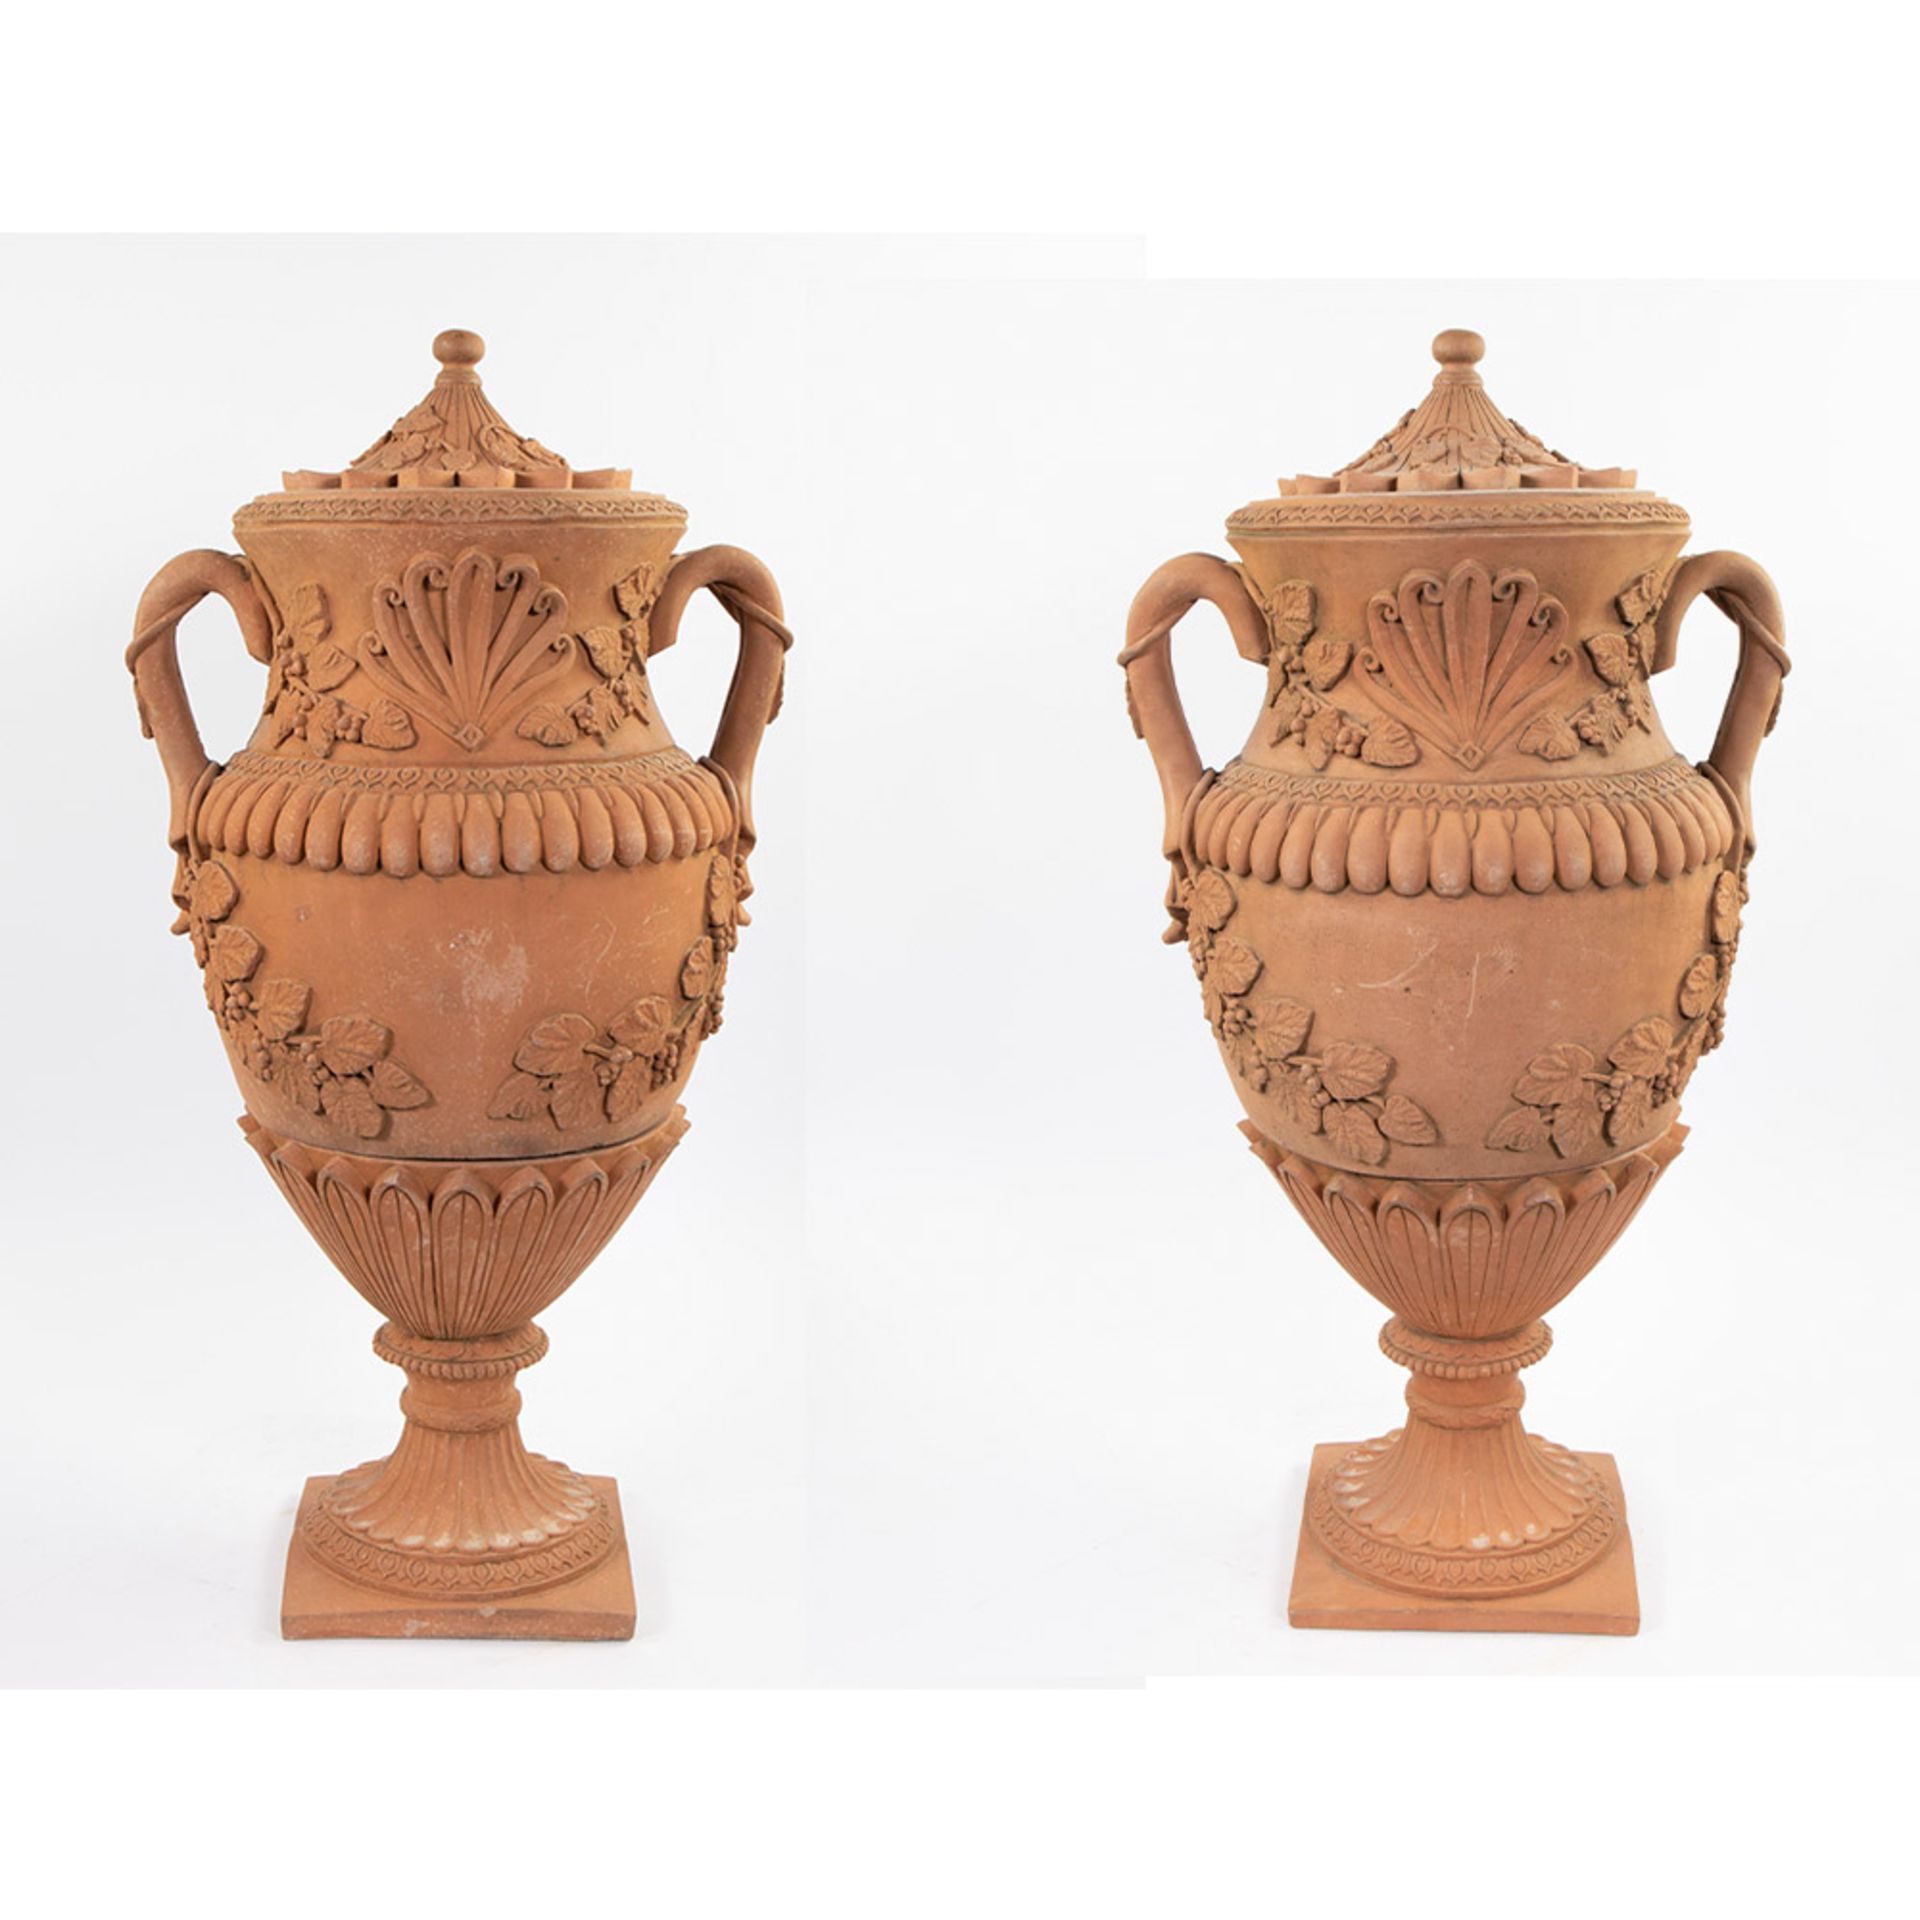 Pair of large 19th century terracotta garden vases decorated with leaf motifs